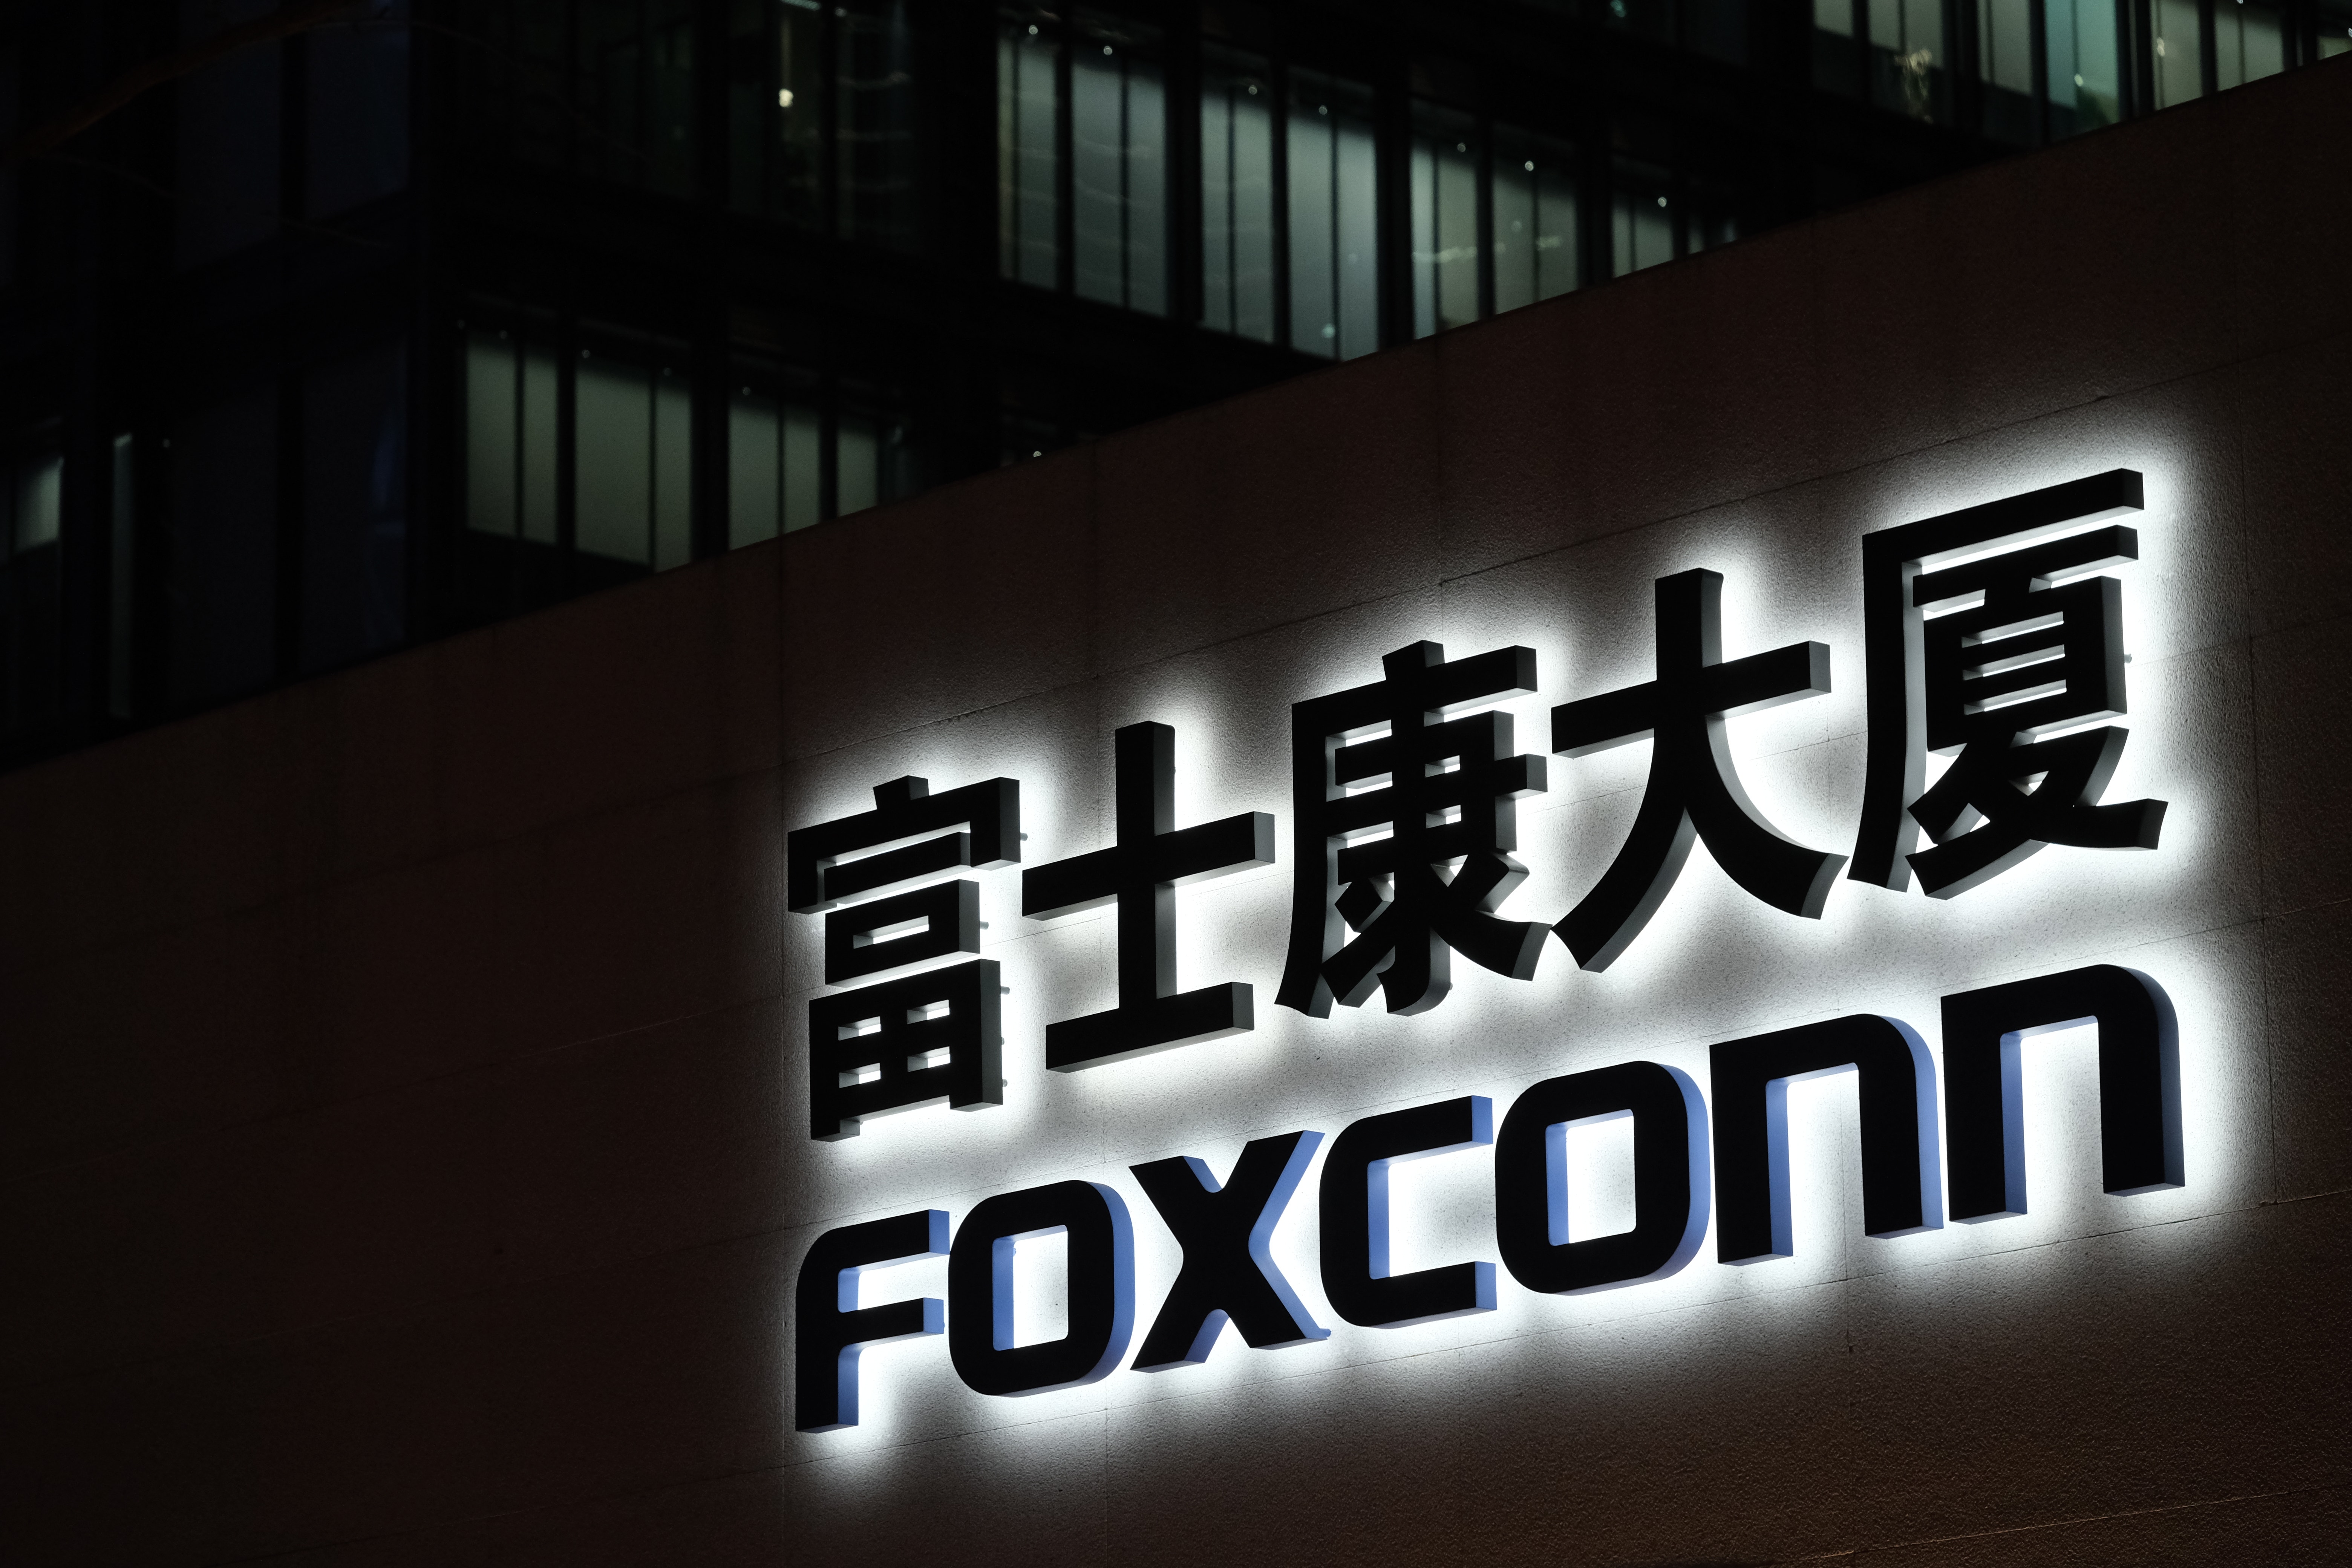 Apple Supplier Foxconn Faces Hefty Fine If It Invests In China Without Taiwan's Approval